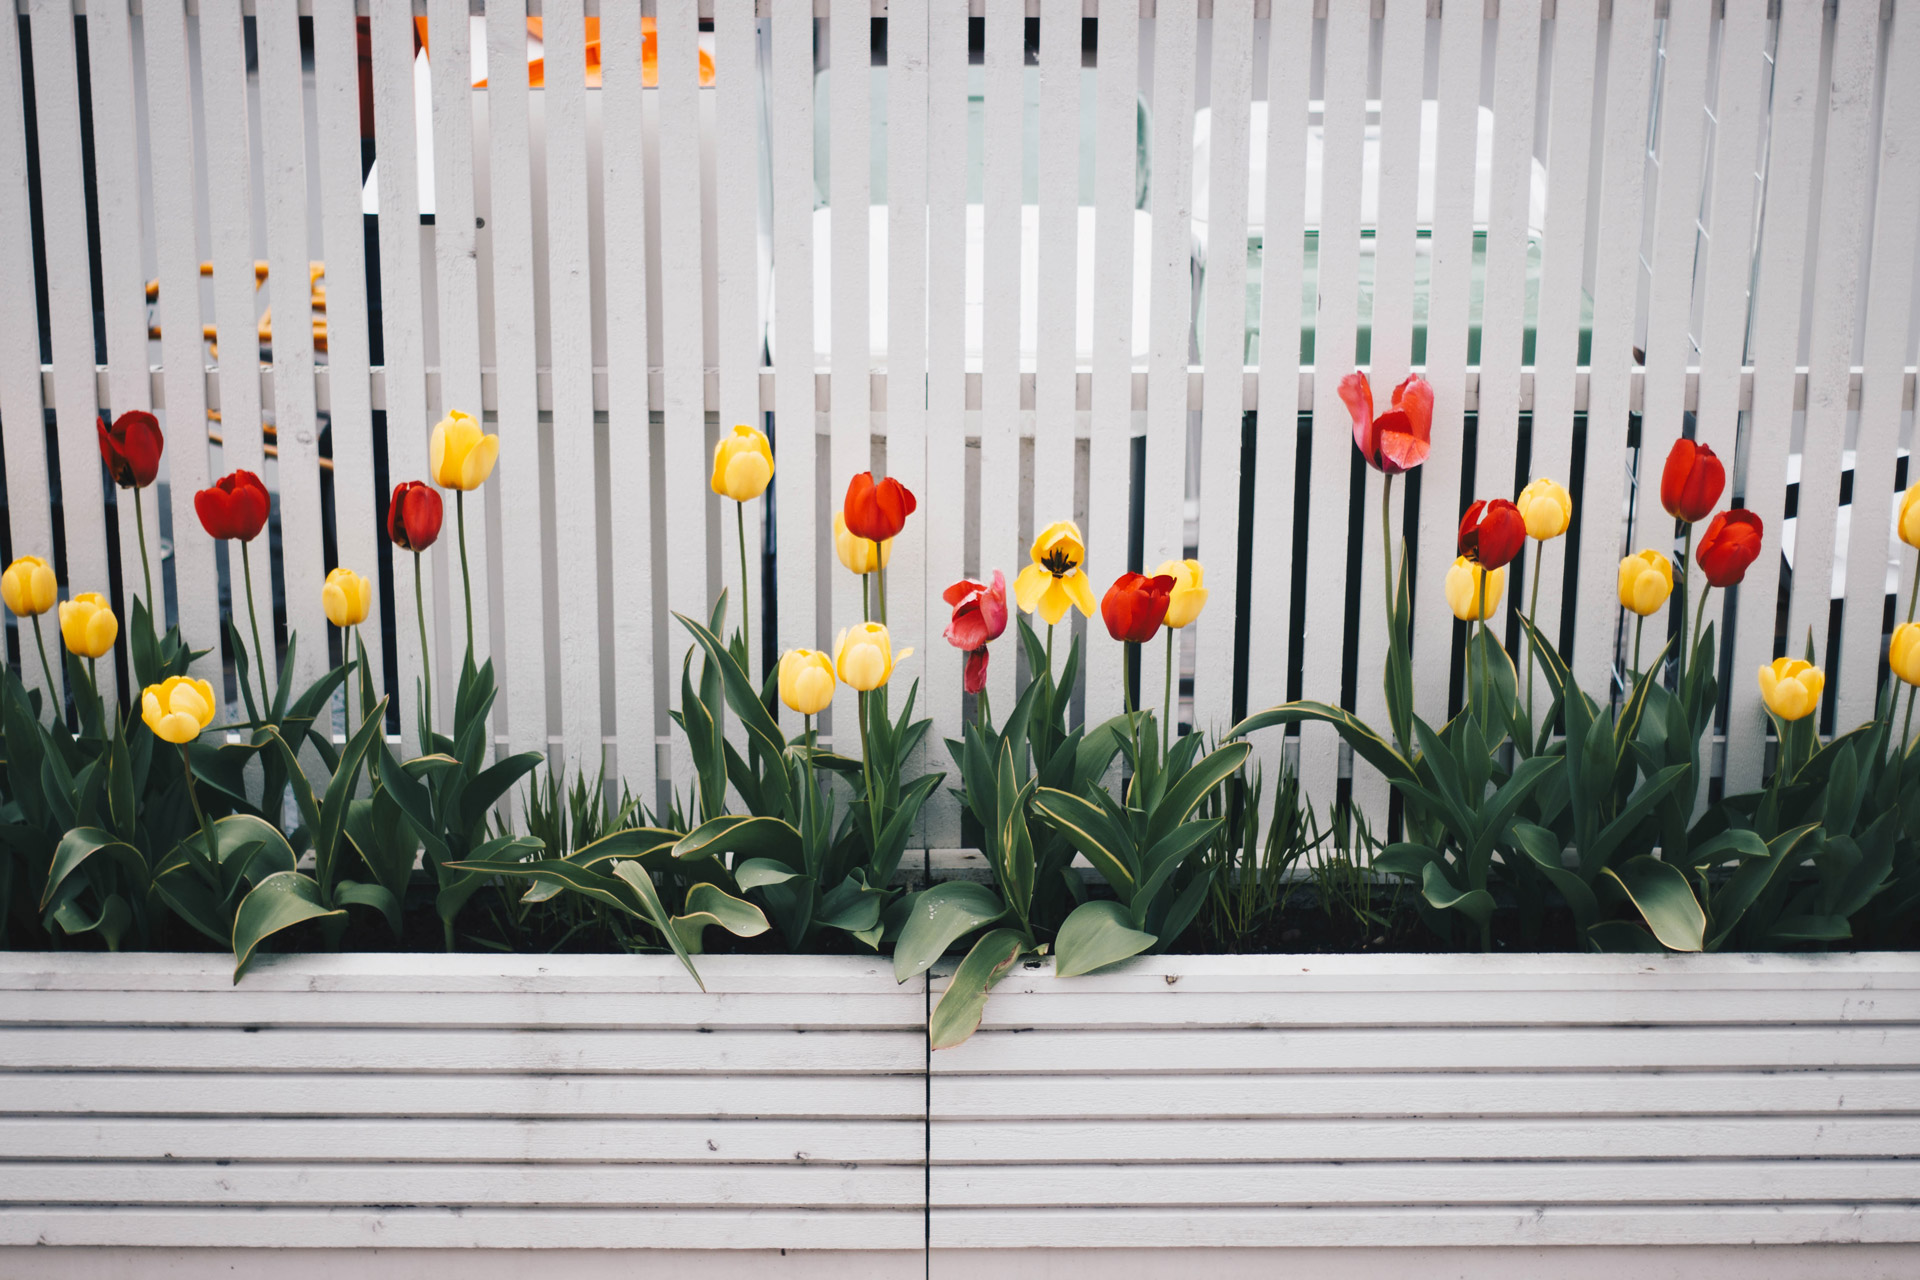 Yellow and red tulips in front of a white painted garden fence.